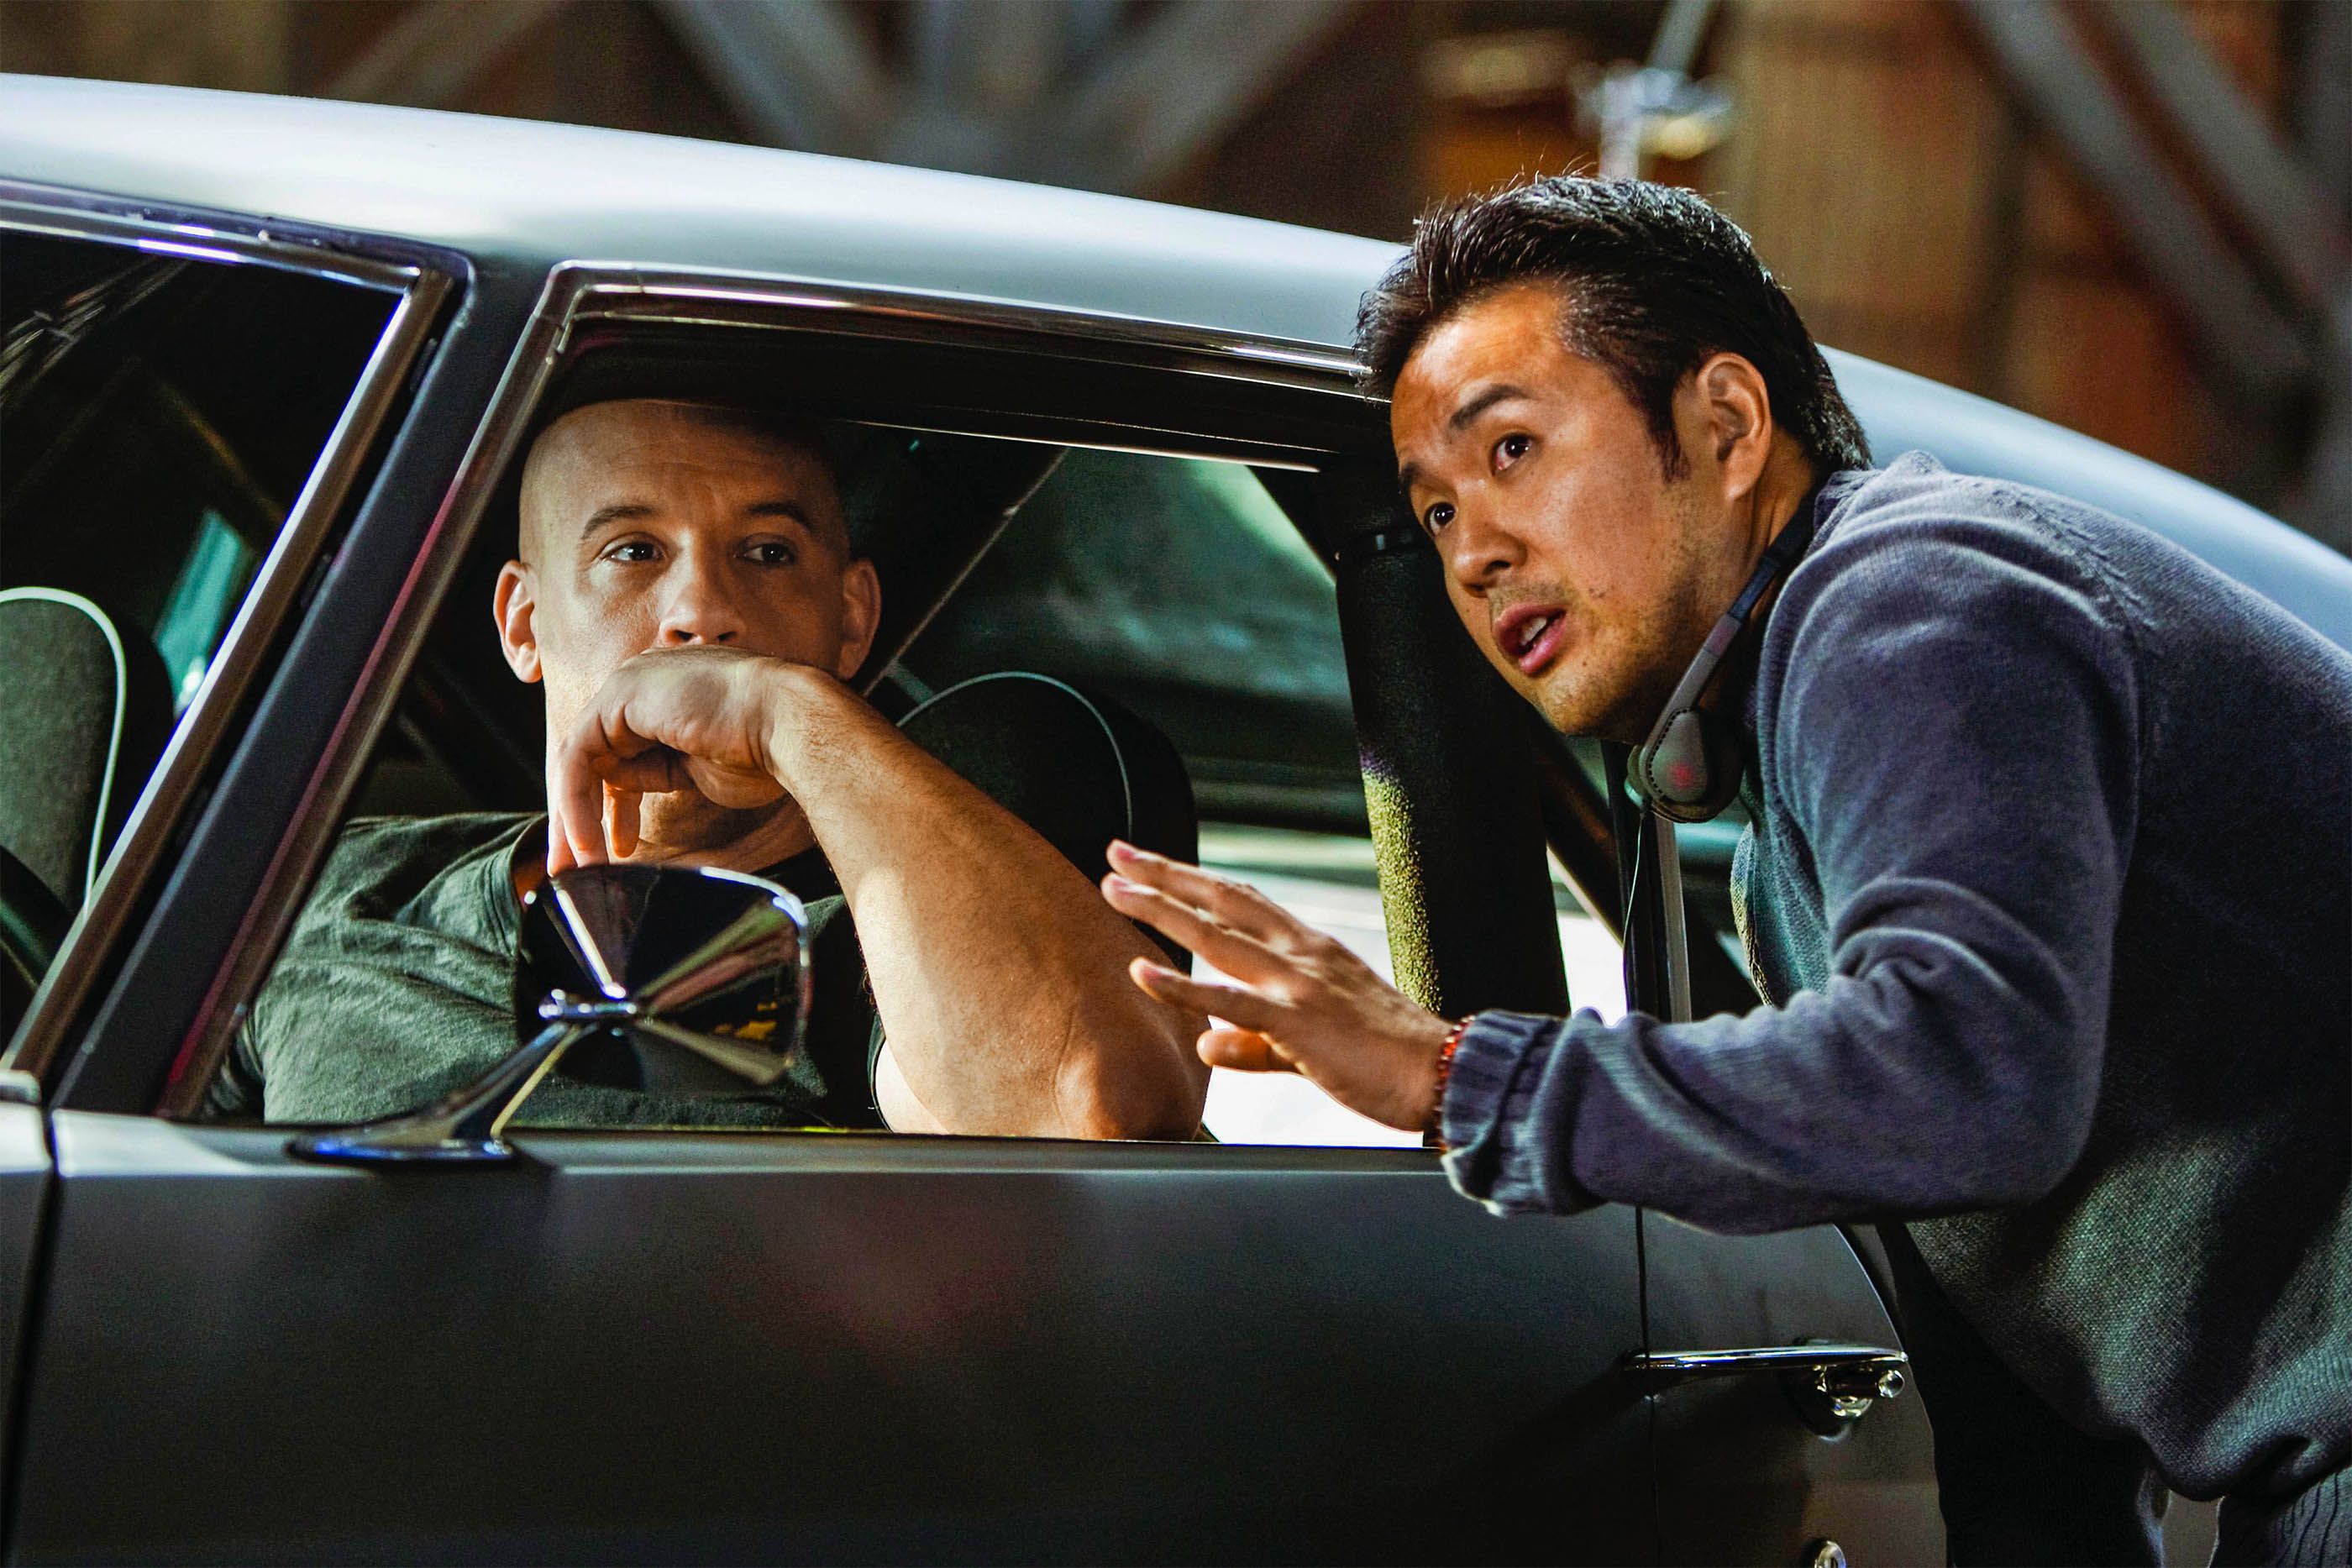 Fast & Furious star Sung Kang steps into Initial D live-action